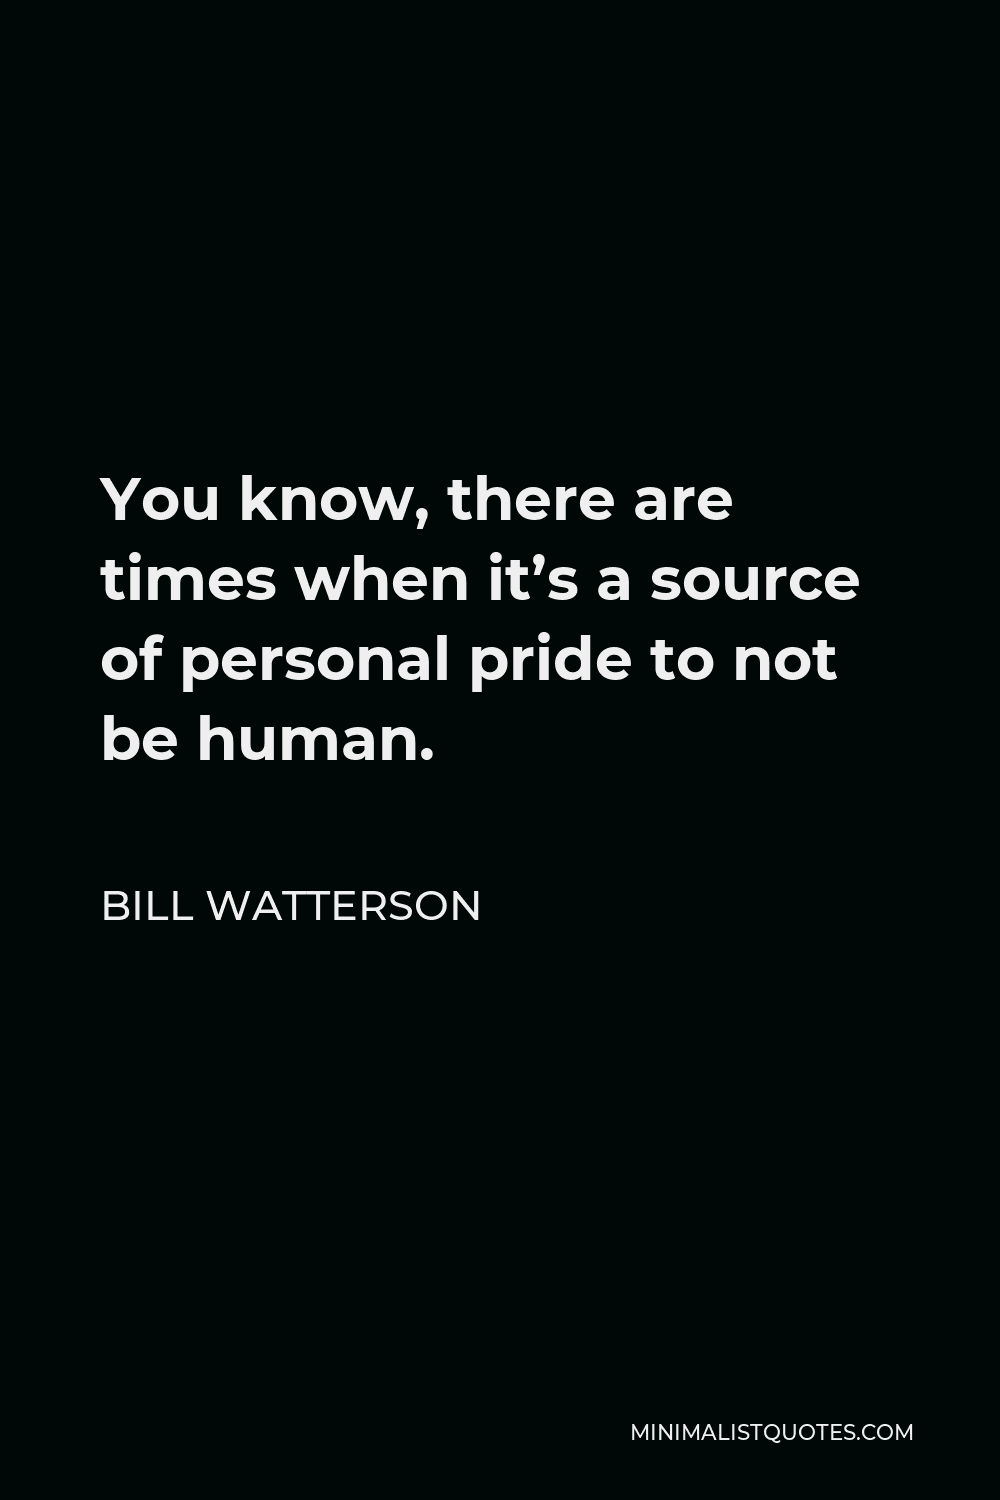 Bill Watterson Quote - You know, there are times when it’s a source of personal pride to not be human.